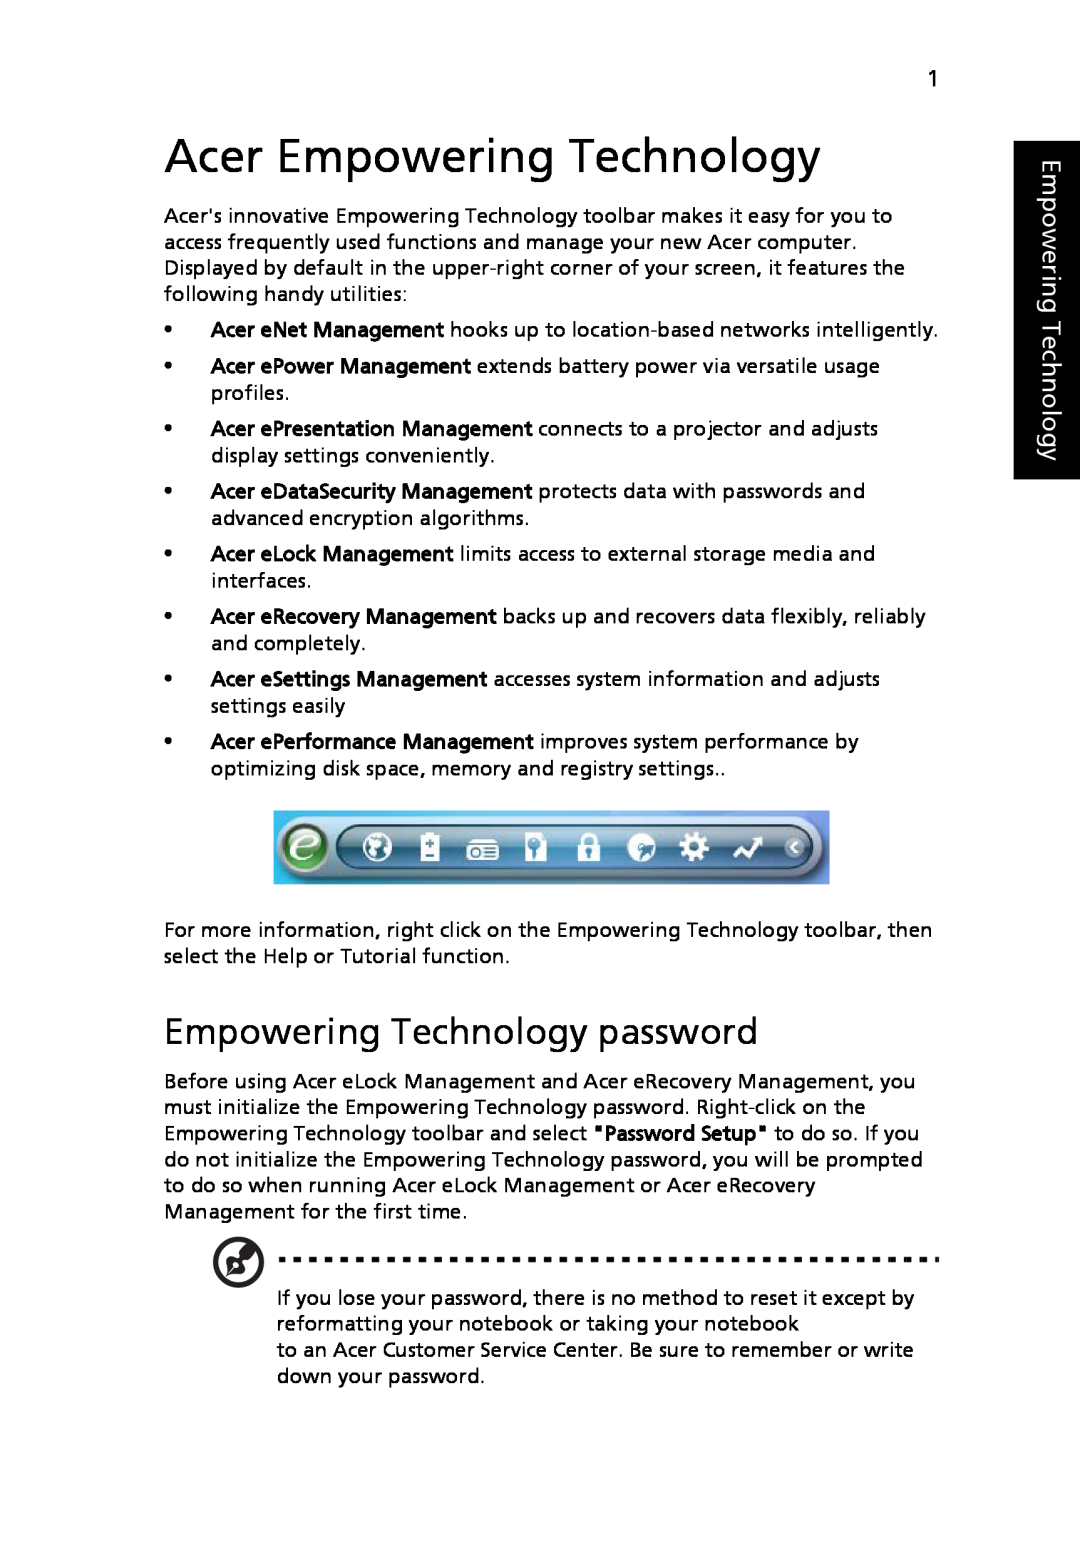 Acer 3040 Series, 3030 Series manual Acer Empowering Technology, Empowering Technology password 